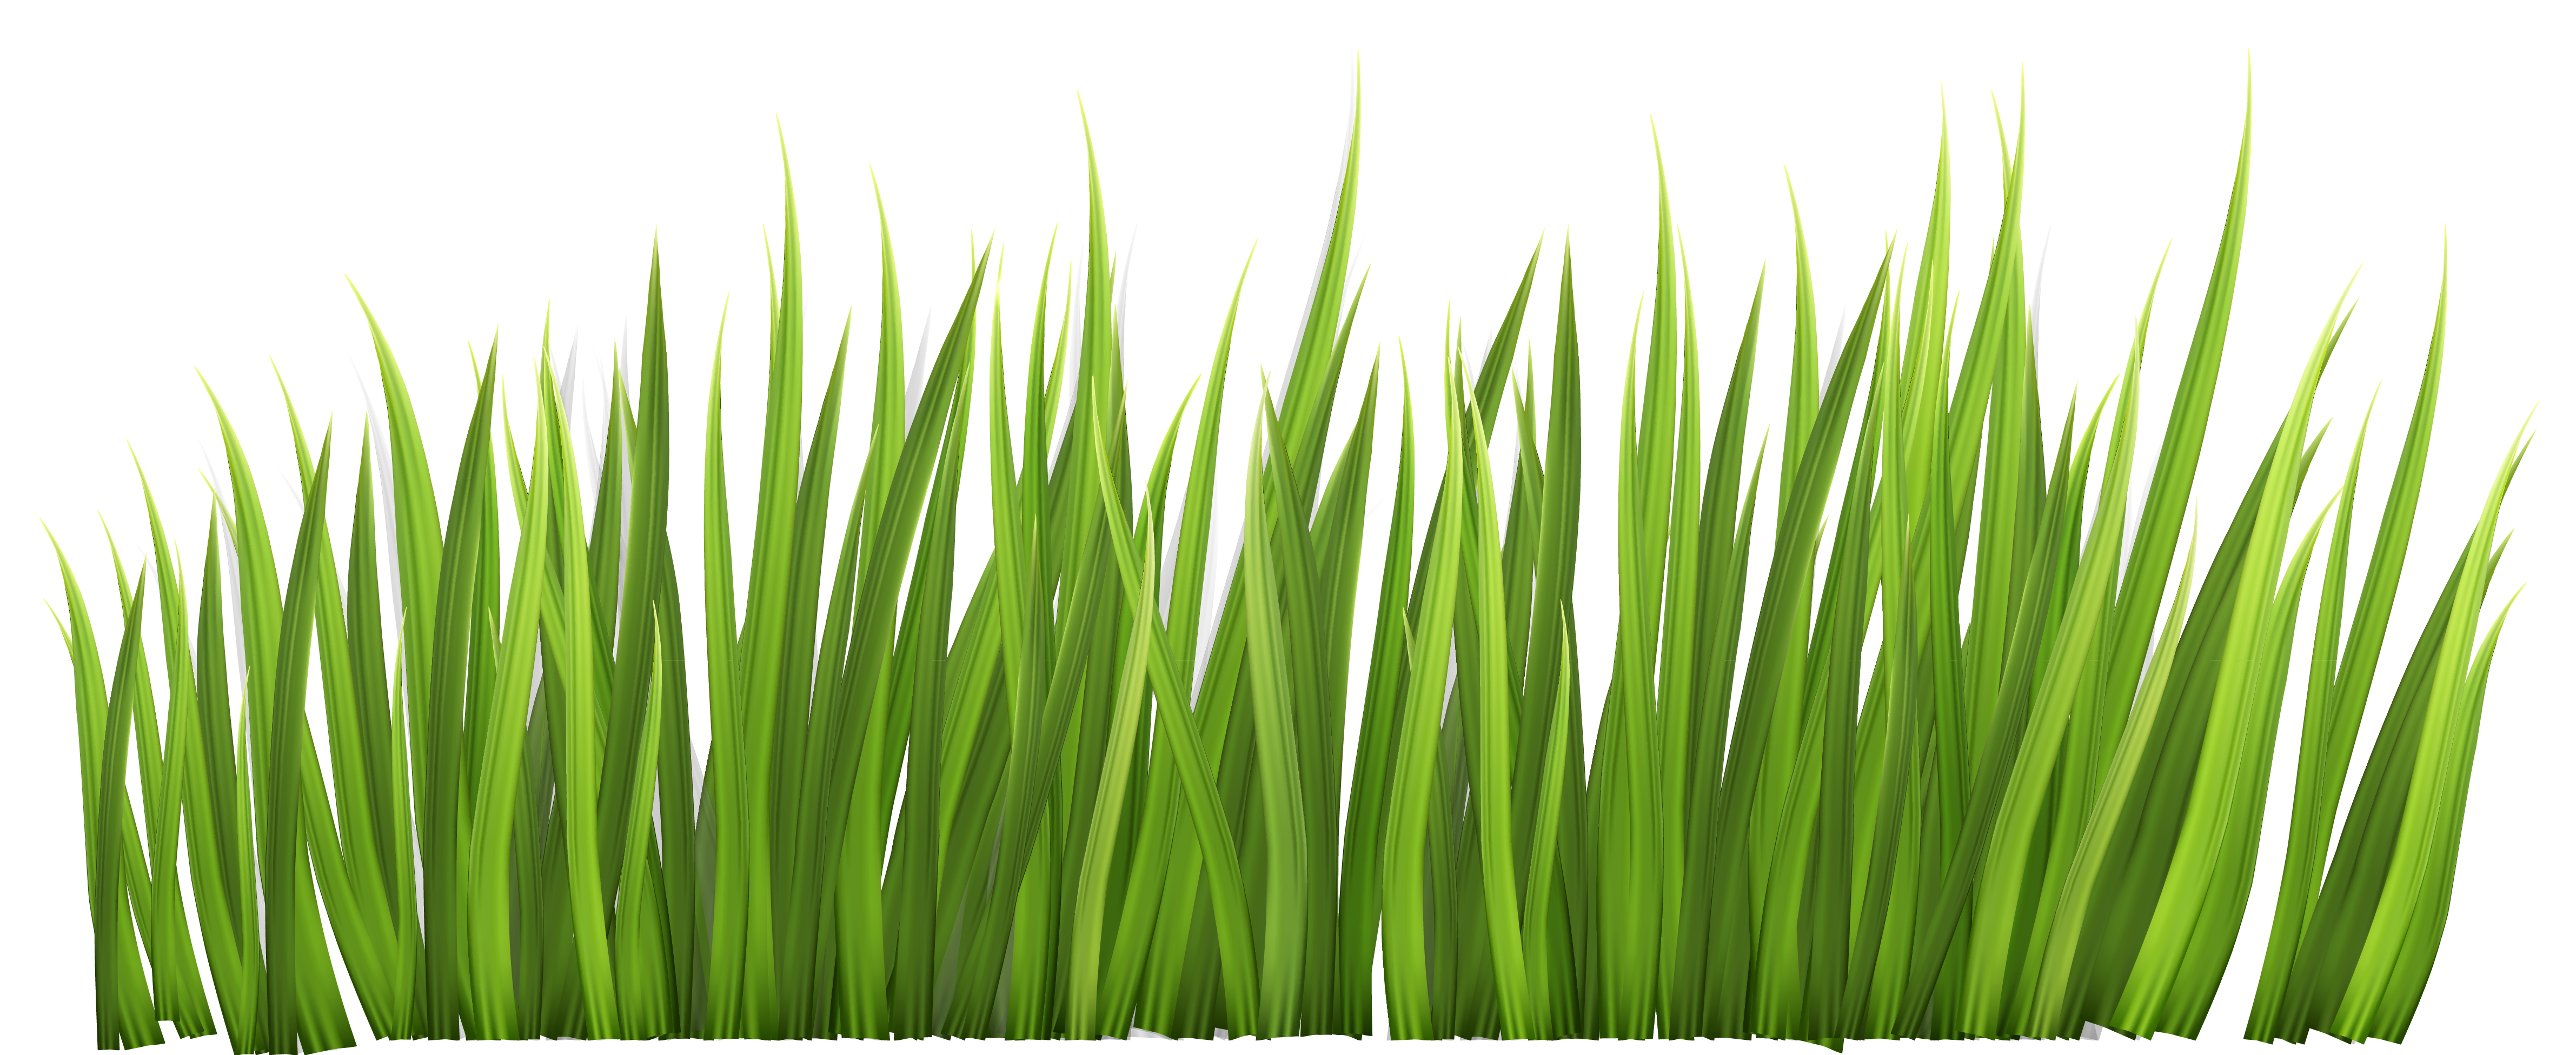 png clipart grass - photo #9